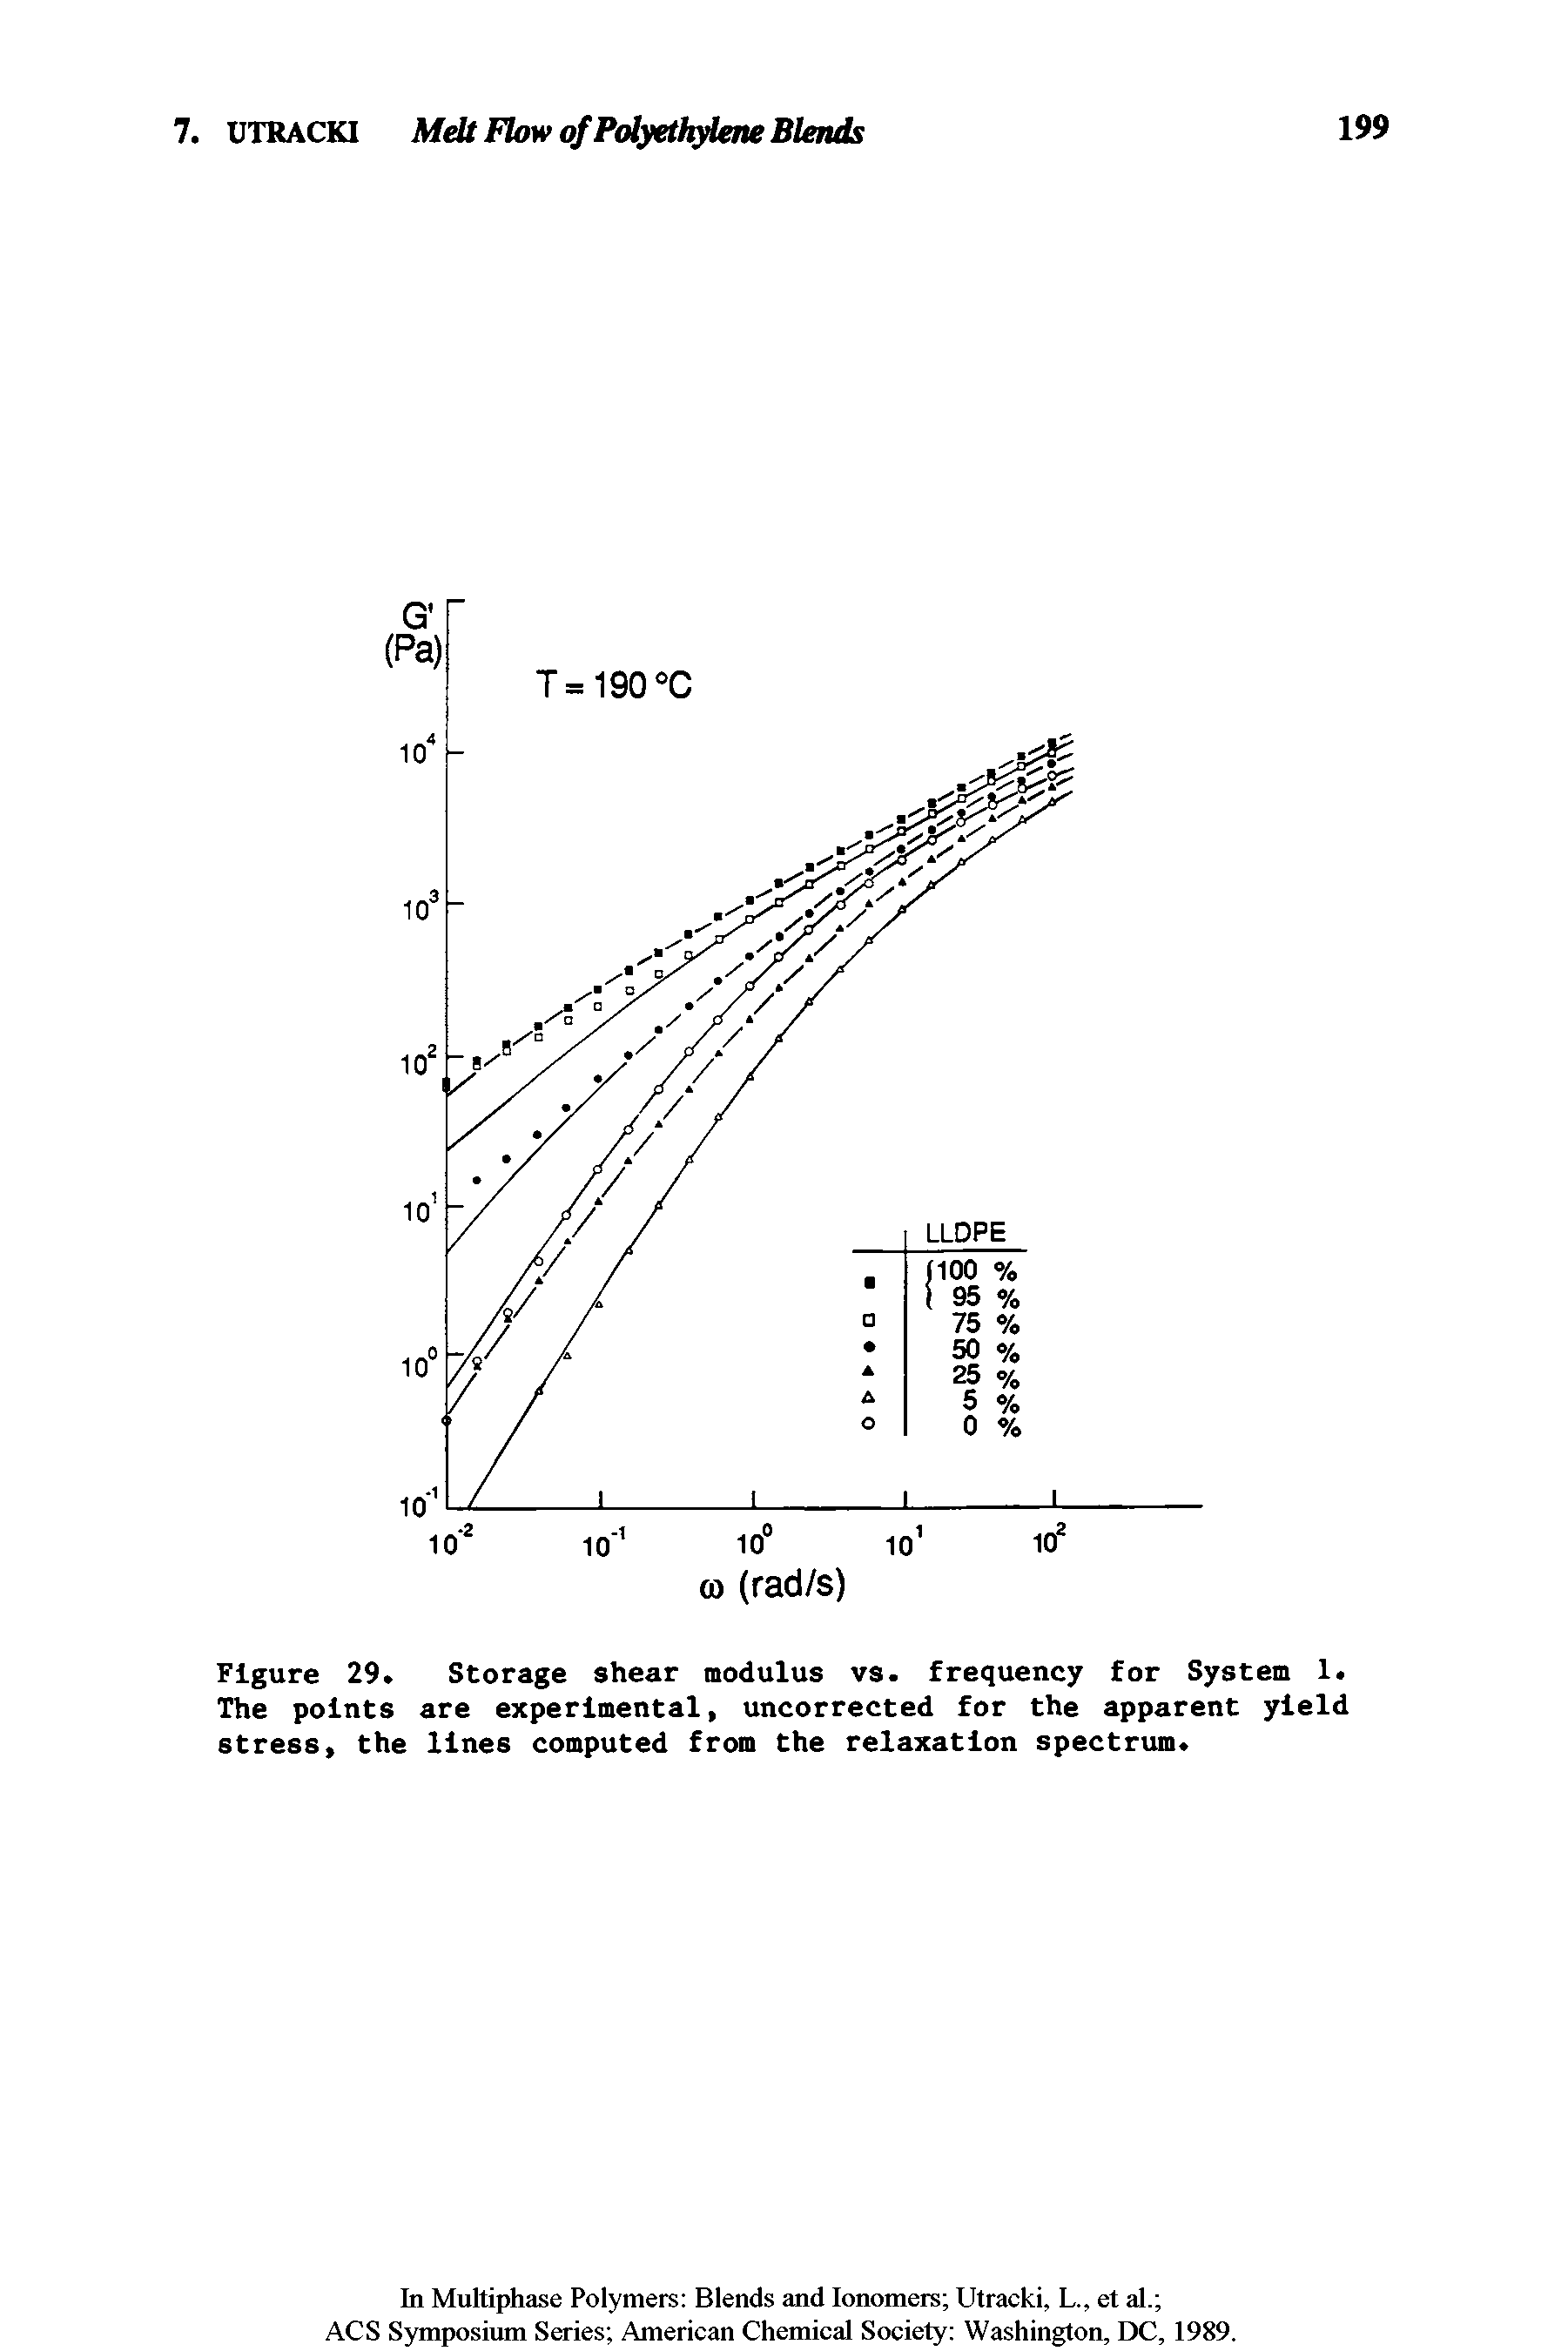 Figure 29. Storage shear modulus vs. frequency for System 1. The points are experimental, uncorrected for the apparent yield stress, the lines computed from the relaxation spectrum.